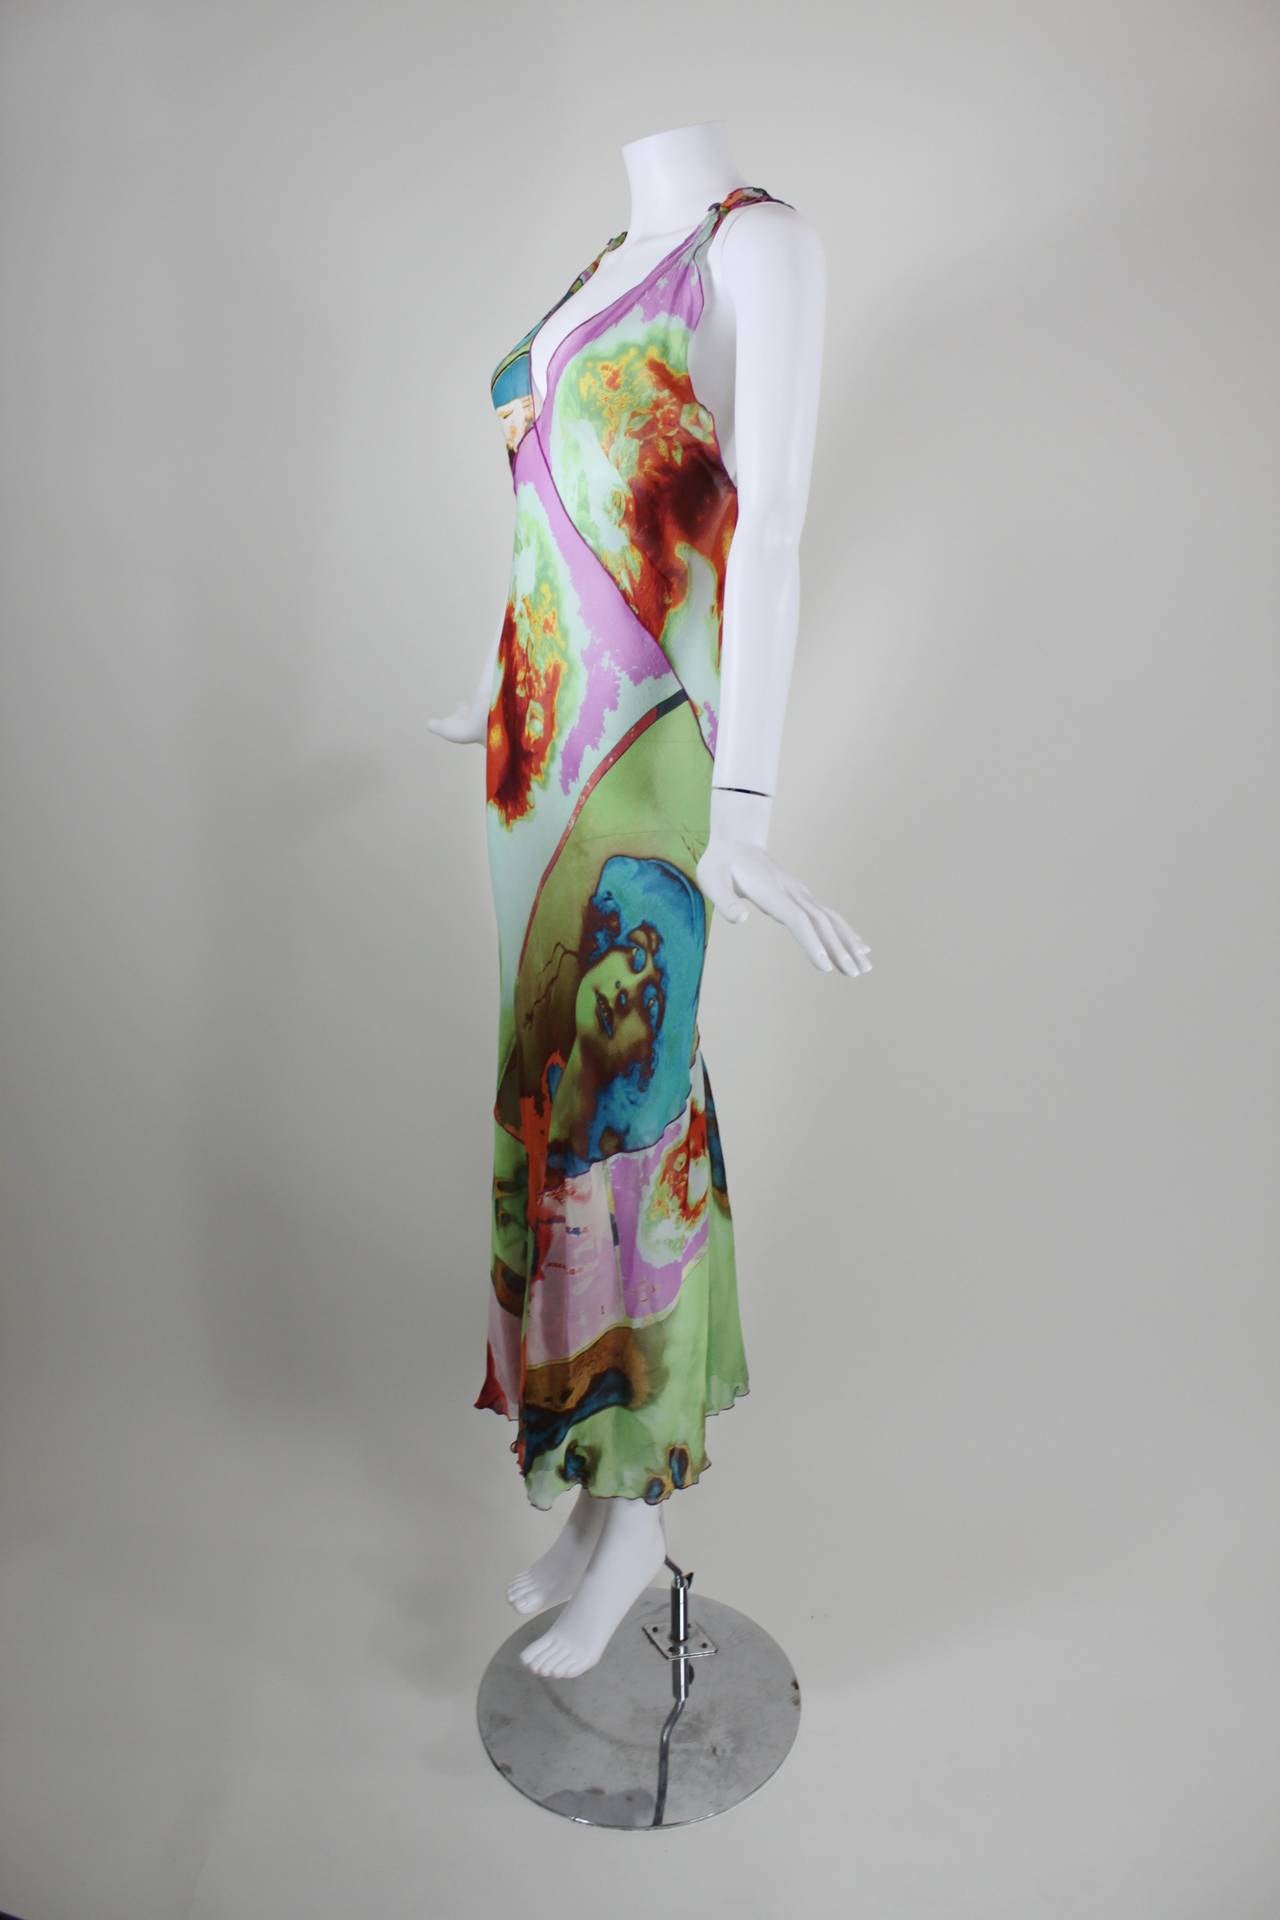 Jean Paul Gaultier Silk Bias Dress with Portrait Print

-Unlined
-Marked a French 40, US 10

Measurements--
Bust: up to 40 inches
Waist: up to 36 inches
Hip: up to 44 inches
Length, Shoulder to Shoulder: 15 inches
Length, Shoulder to Hem: